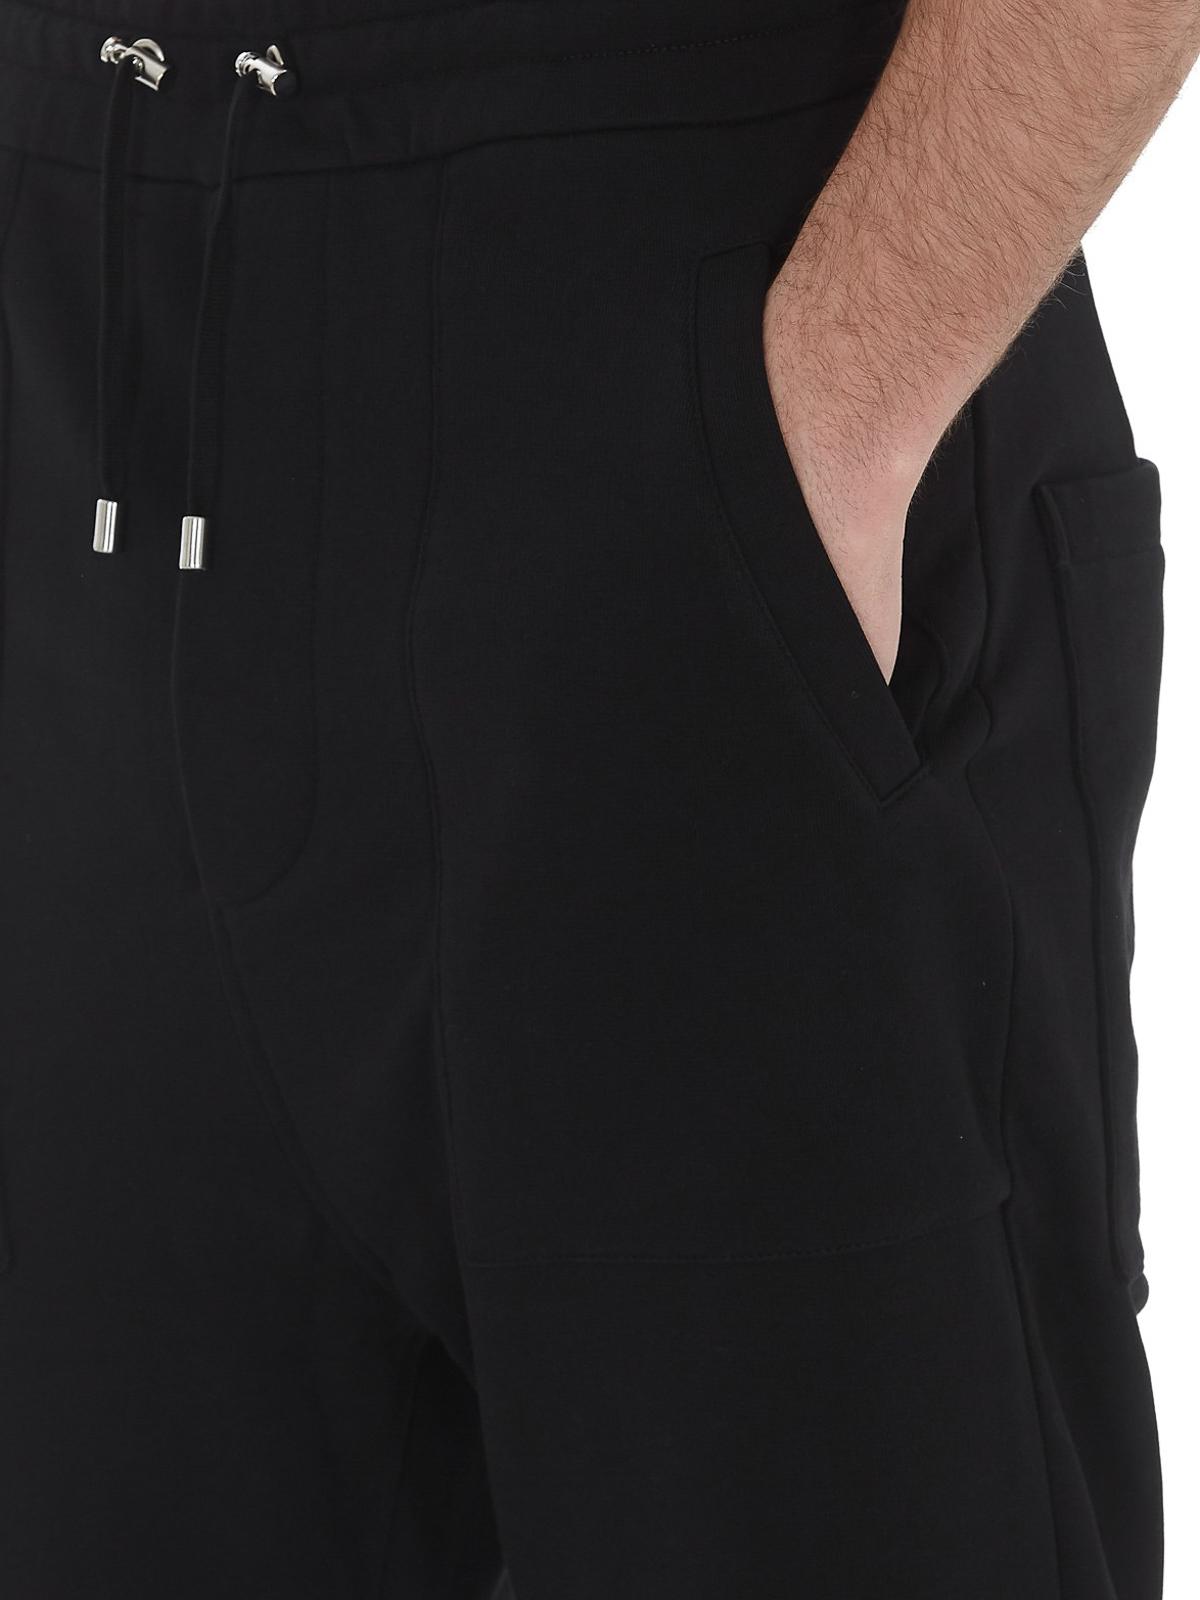 Balmain Cropped Cotton Tracksuit Bottoms in Black for Men - Lyst